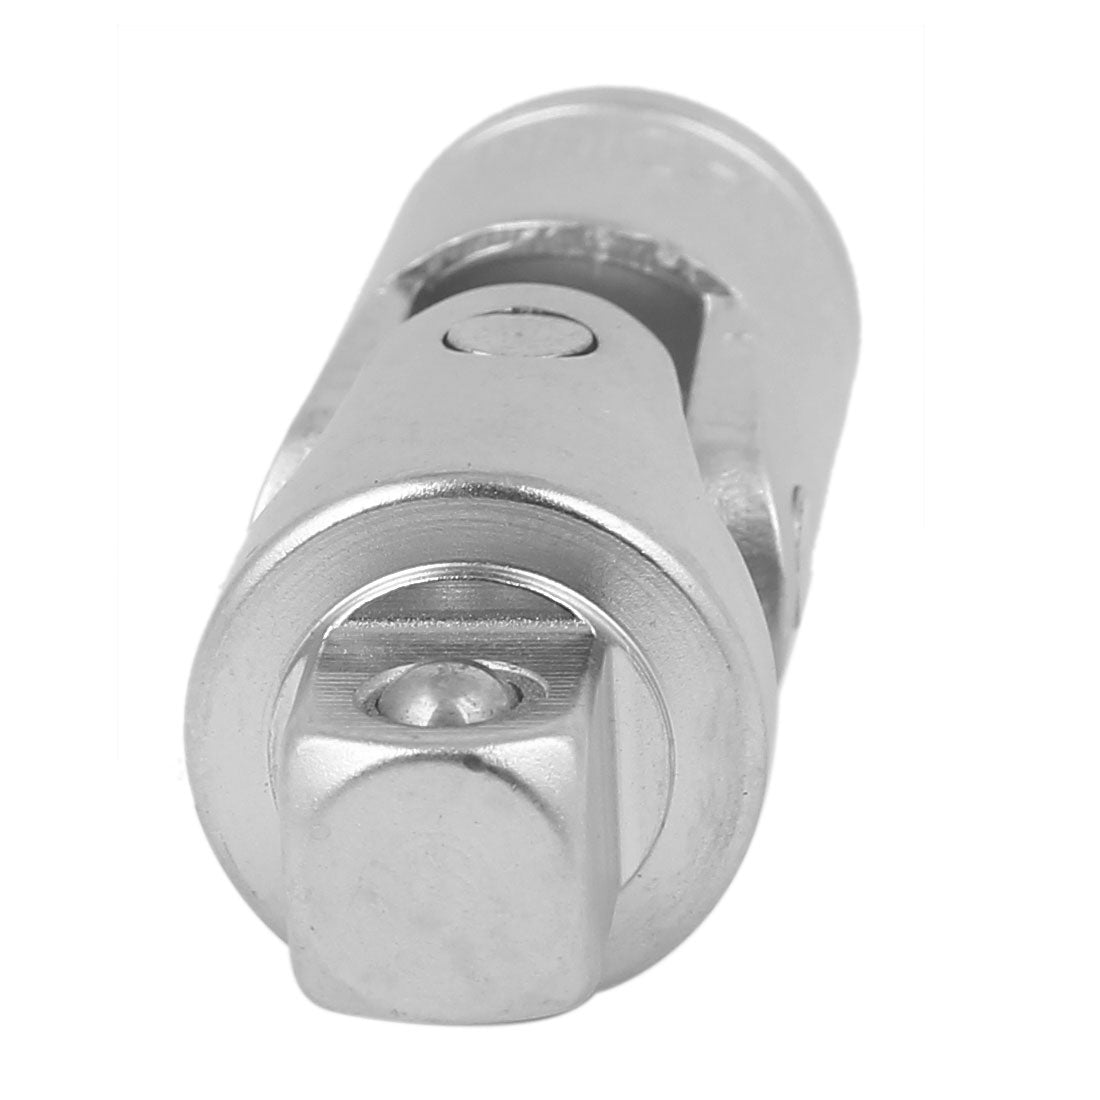 uxcell Uxcell 3/8" Square Driver Chrome Vanadium Steel 90 Degree Universal Joint Swivel Socket Adapter